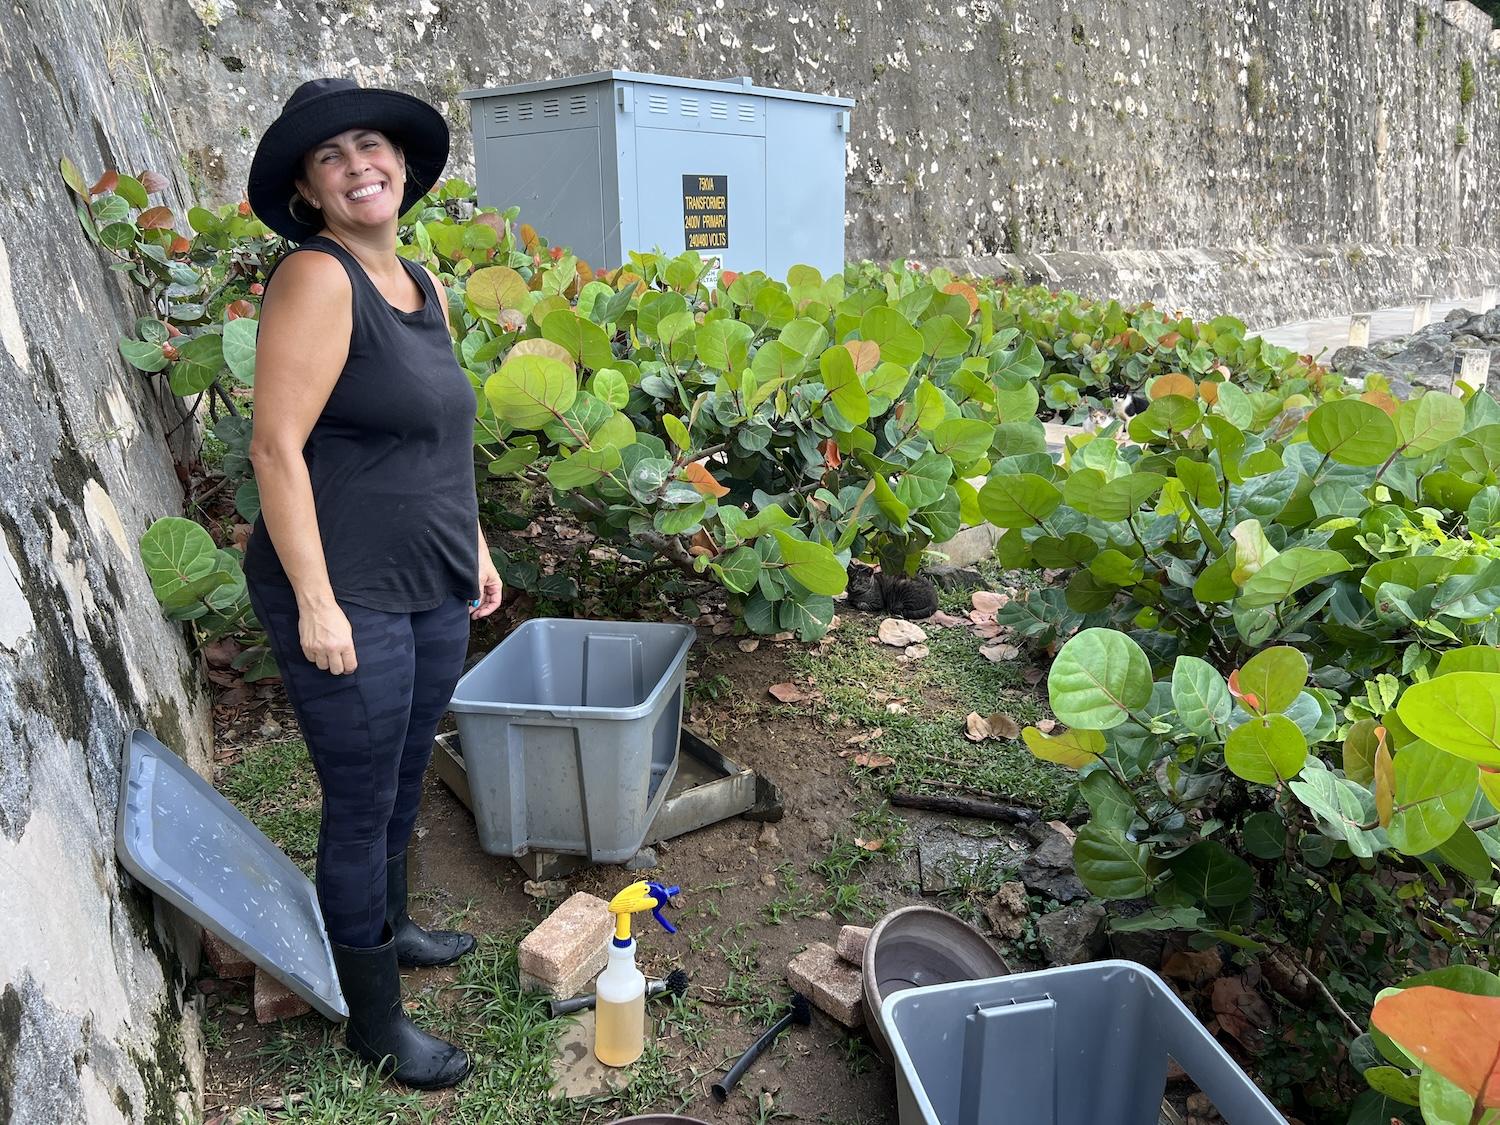 Karla Colom volunteers three times a week with Save A Gato, feeding and caring for the cats that live along a paved pathway on National Park Service land in San Juan.